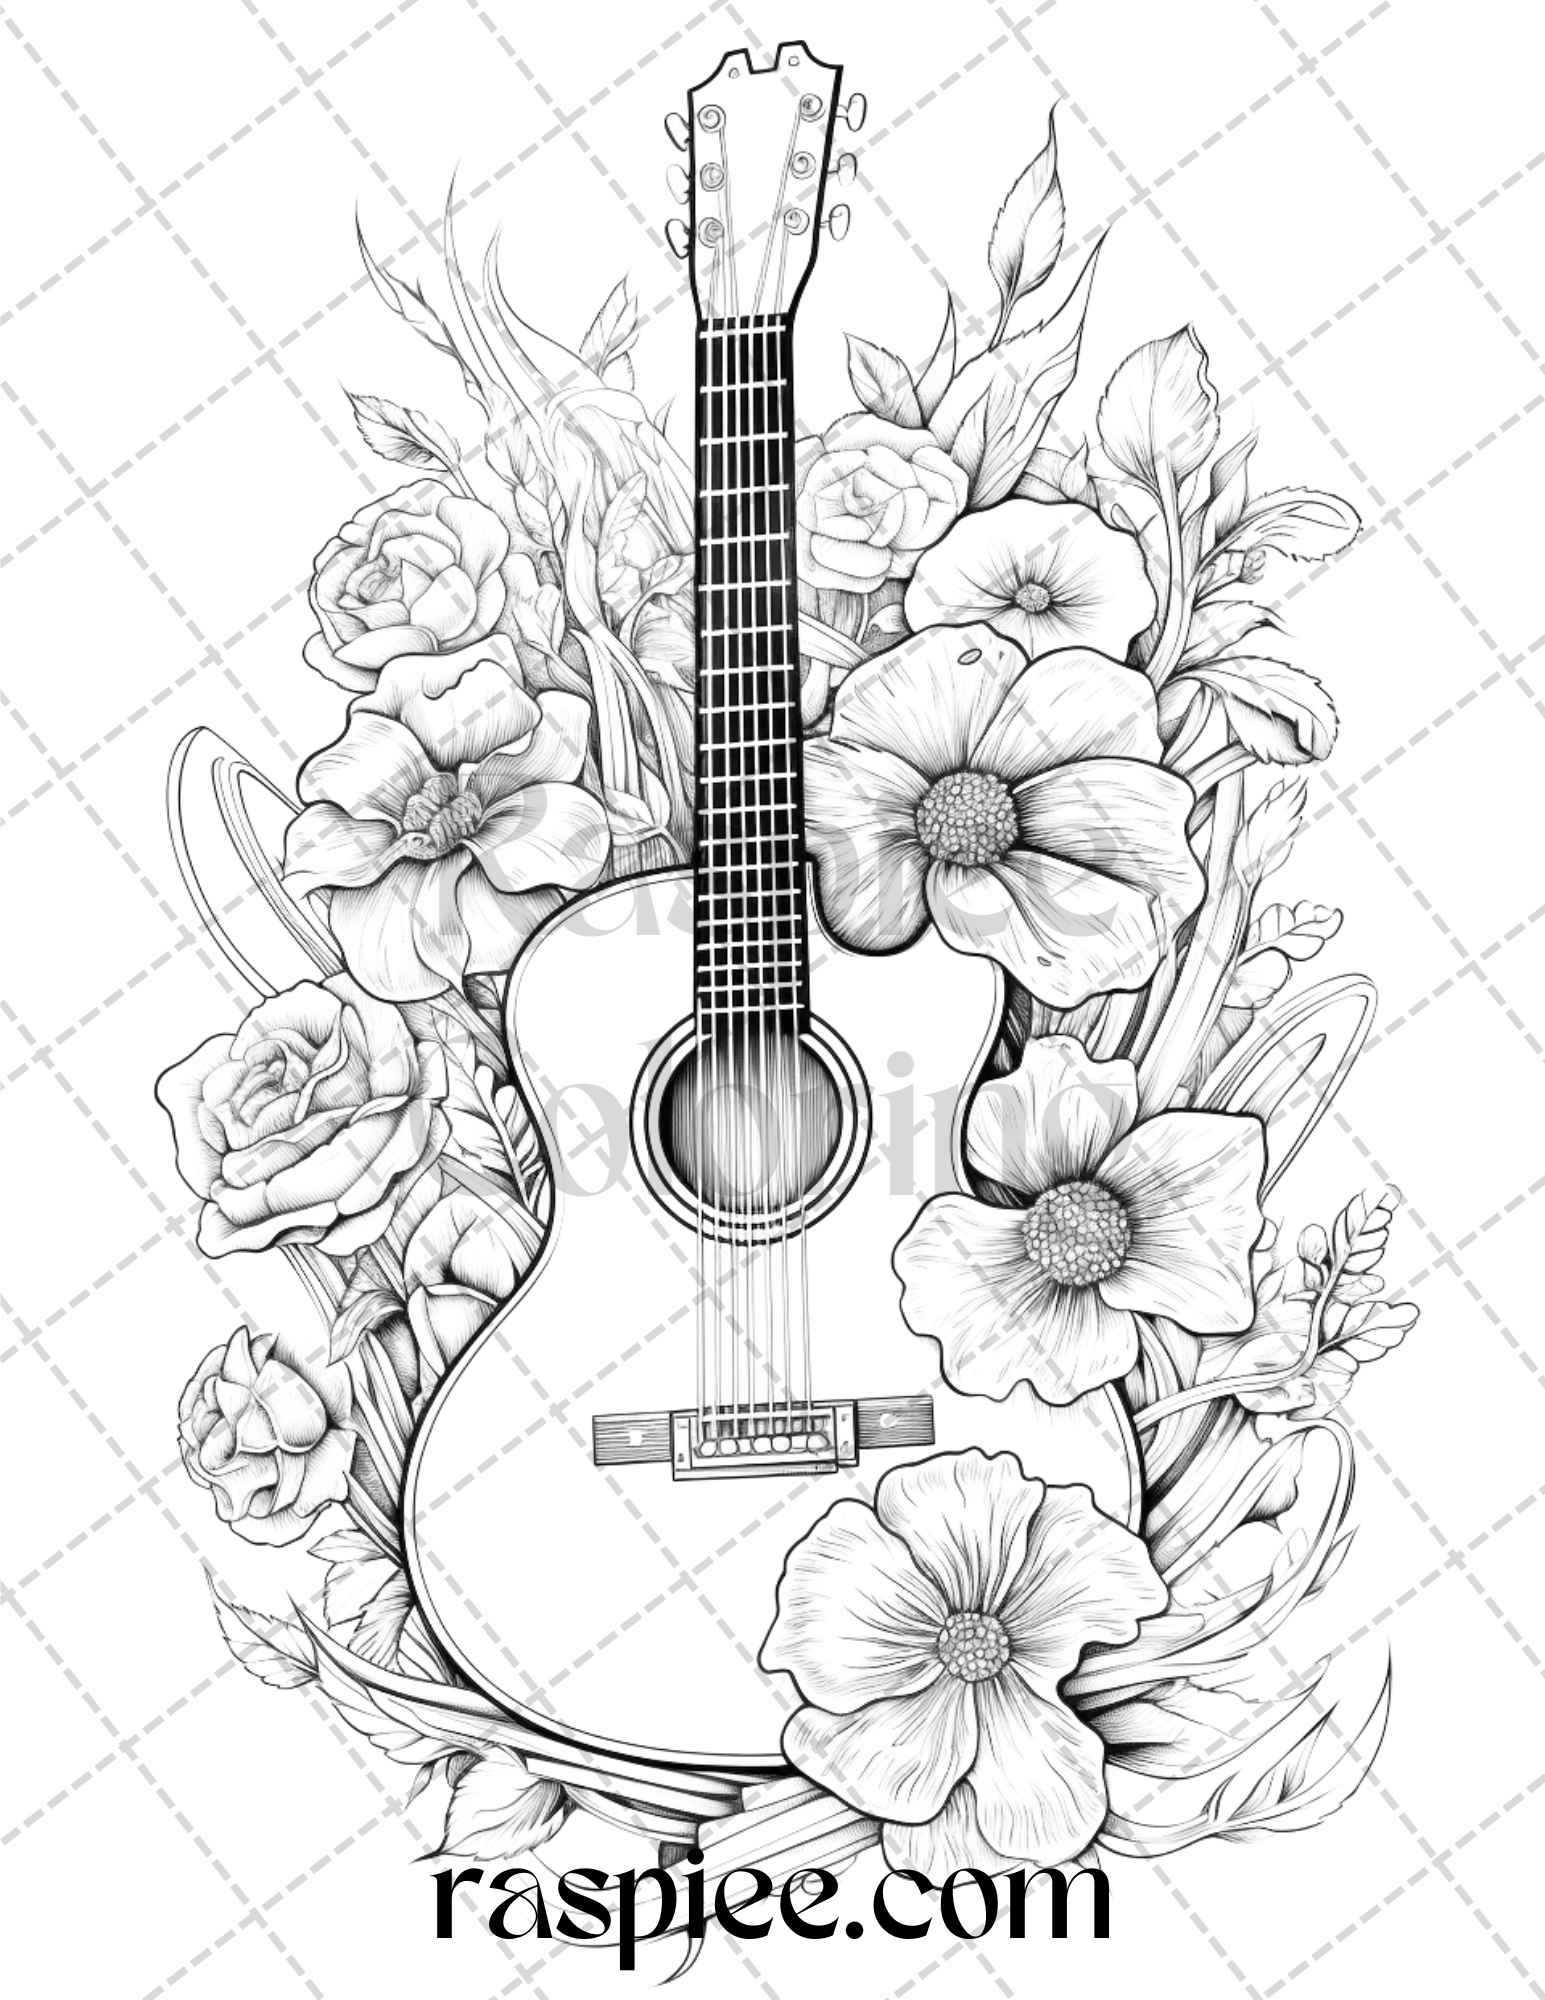 30 Musical Instrument Flower Grayscale Coloring Pages Printable for Adults, PDF File Instant Download - raspiee